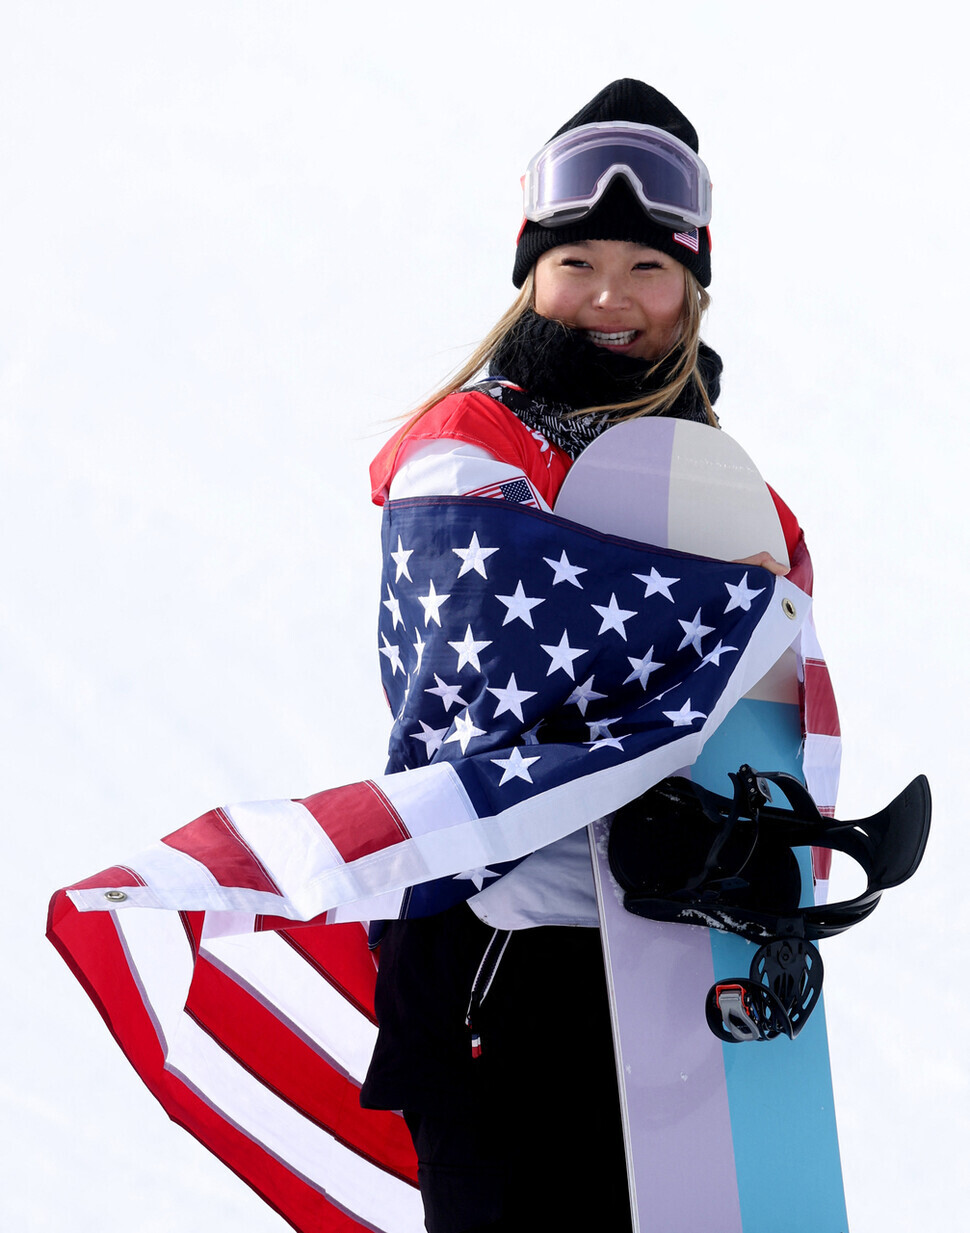 Chloe Kim of the United States celebrates her second successive gold in the women’s halfpipe at the Beijing Olympics on Thursday. (Reuters/Yonhap News)